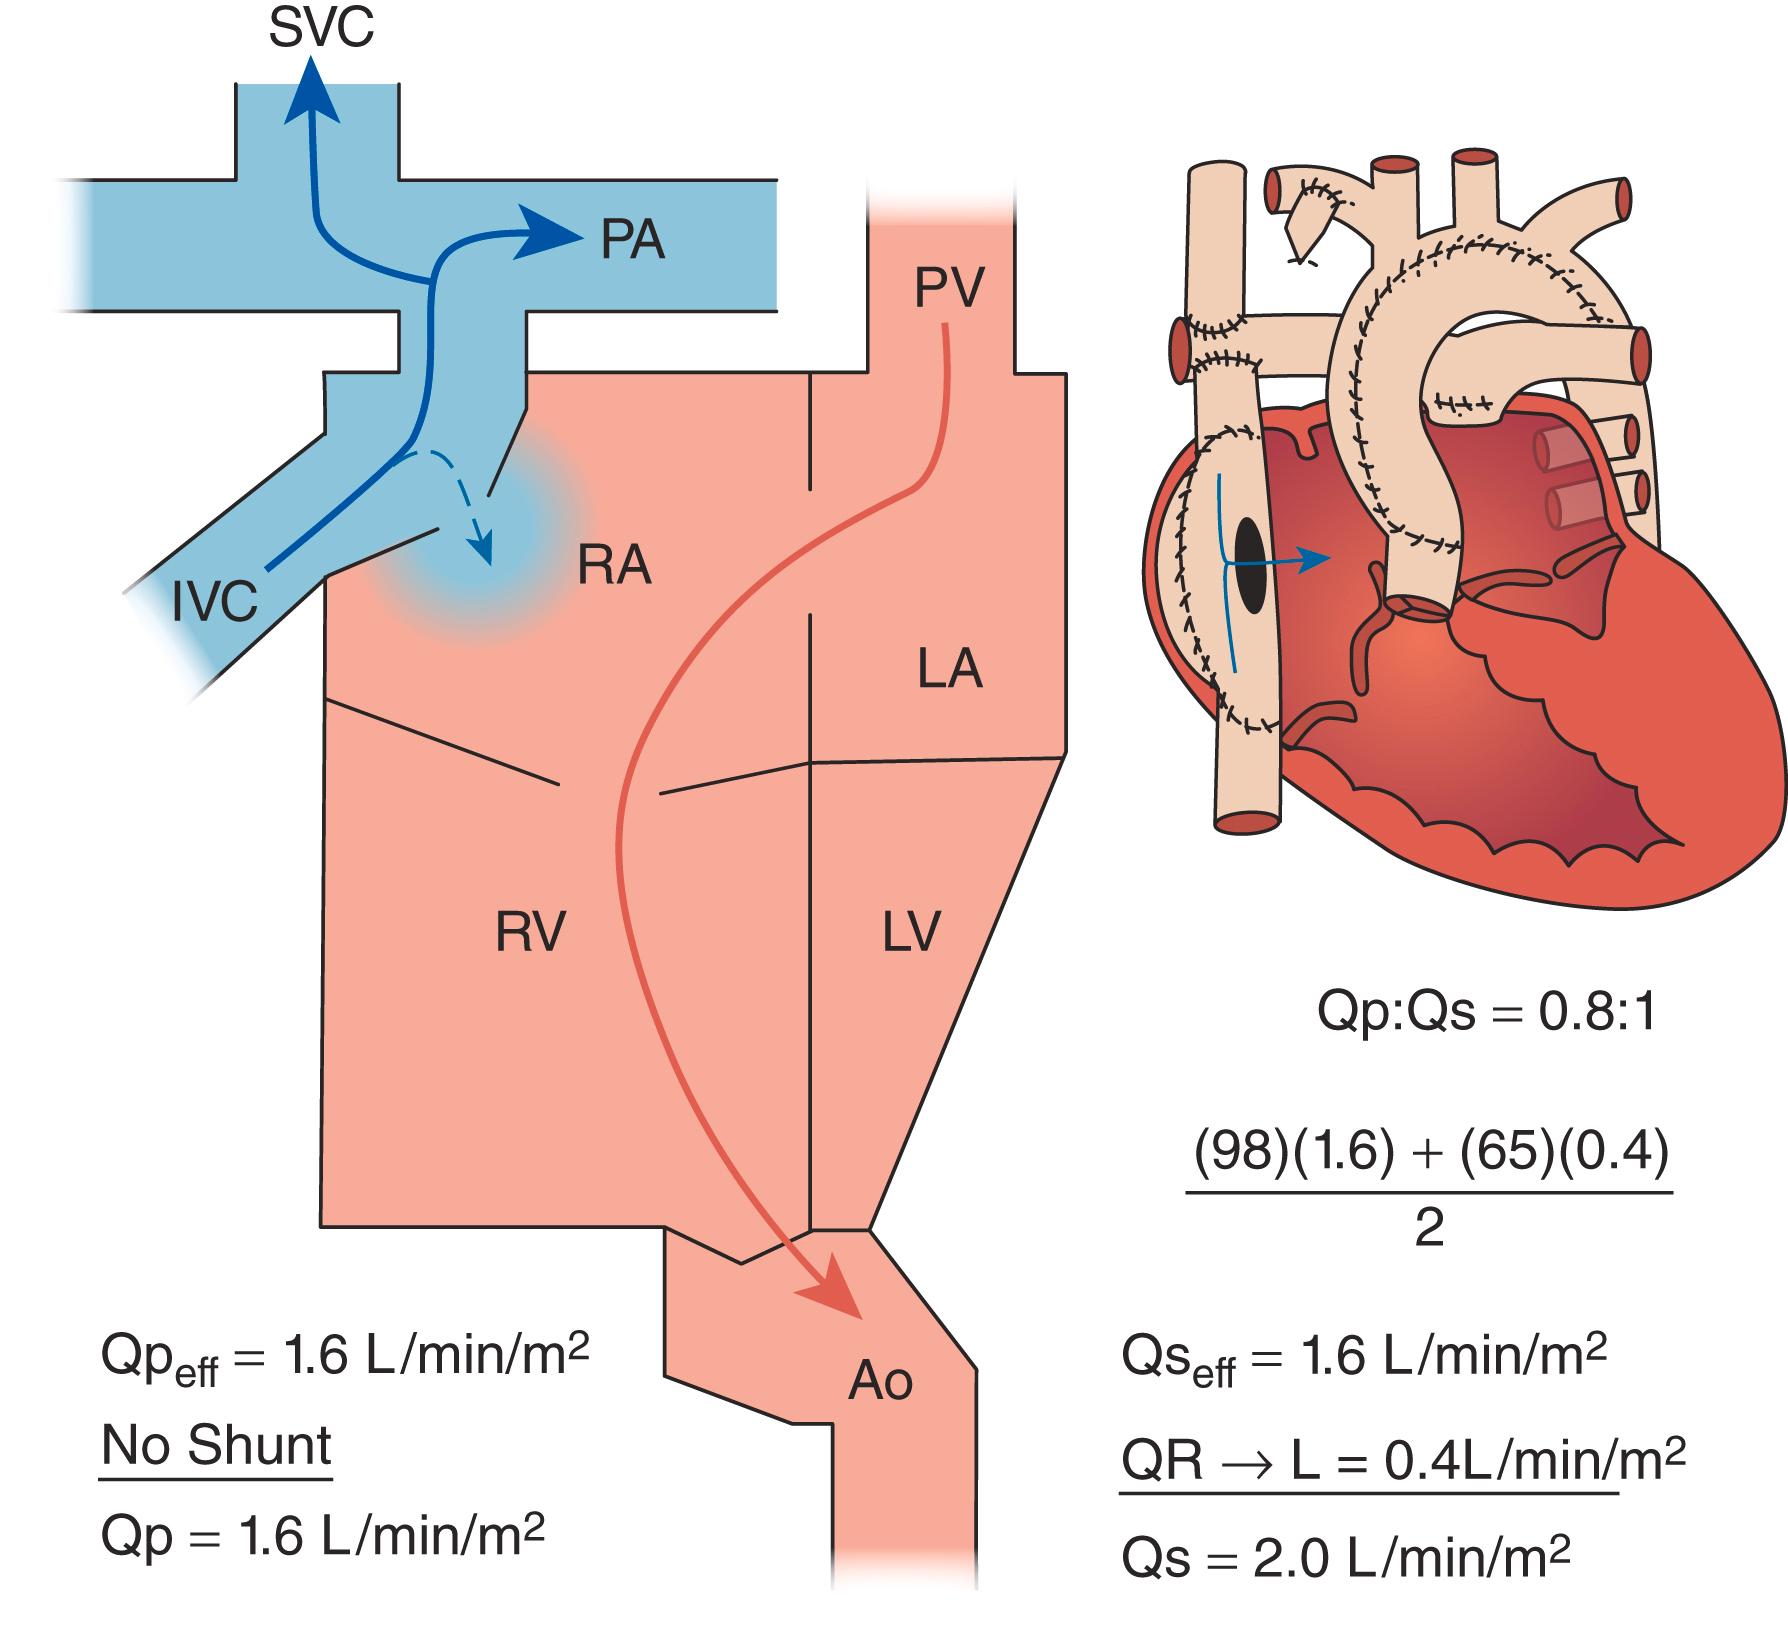 Figure 16.5, Diagram depicting chamber oxygen saturations and flows in single-ventricle patient (hypoplastic left heart syndrome) palliated with a fenestrated lateral Fontan. A fenestration is present allowing a right-to-left (R-L) shunt as a “pop-off” to maintain cardiac output. Ao , Aorta; IVC , inferior vena cava; LA , left atrium; LV , left ventricle; SVC , superior vena cava; PA , pulmonary artery; RA , right atrium; RV , right ventricle.